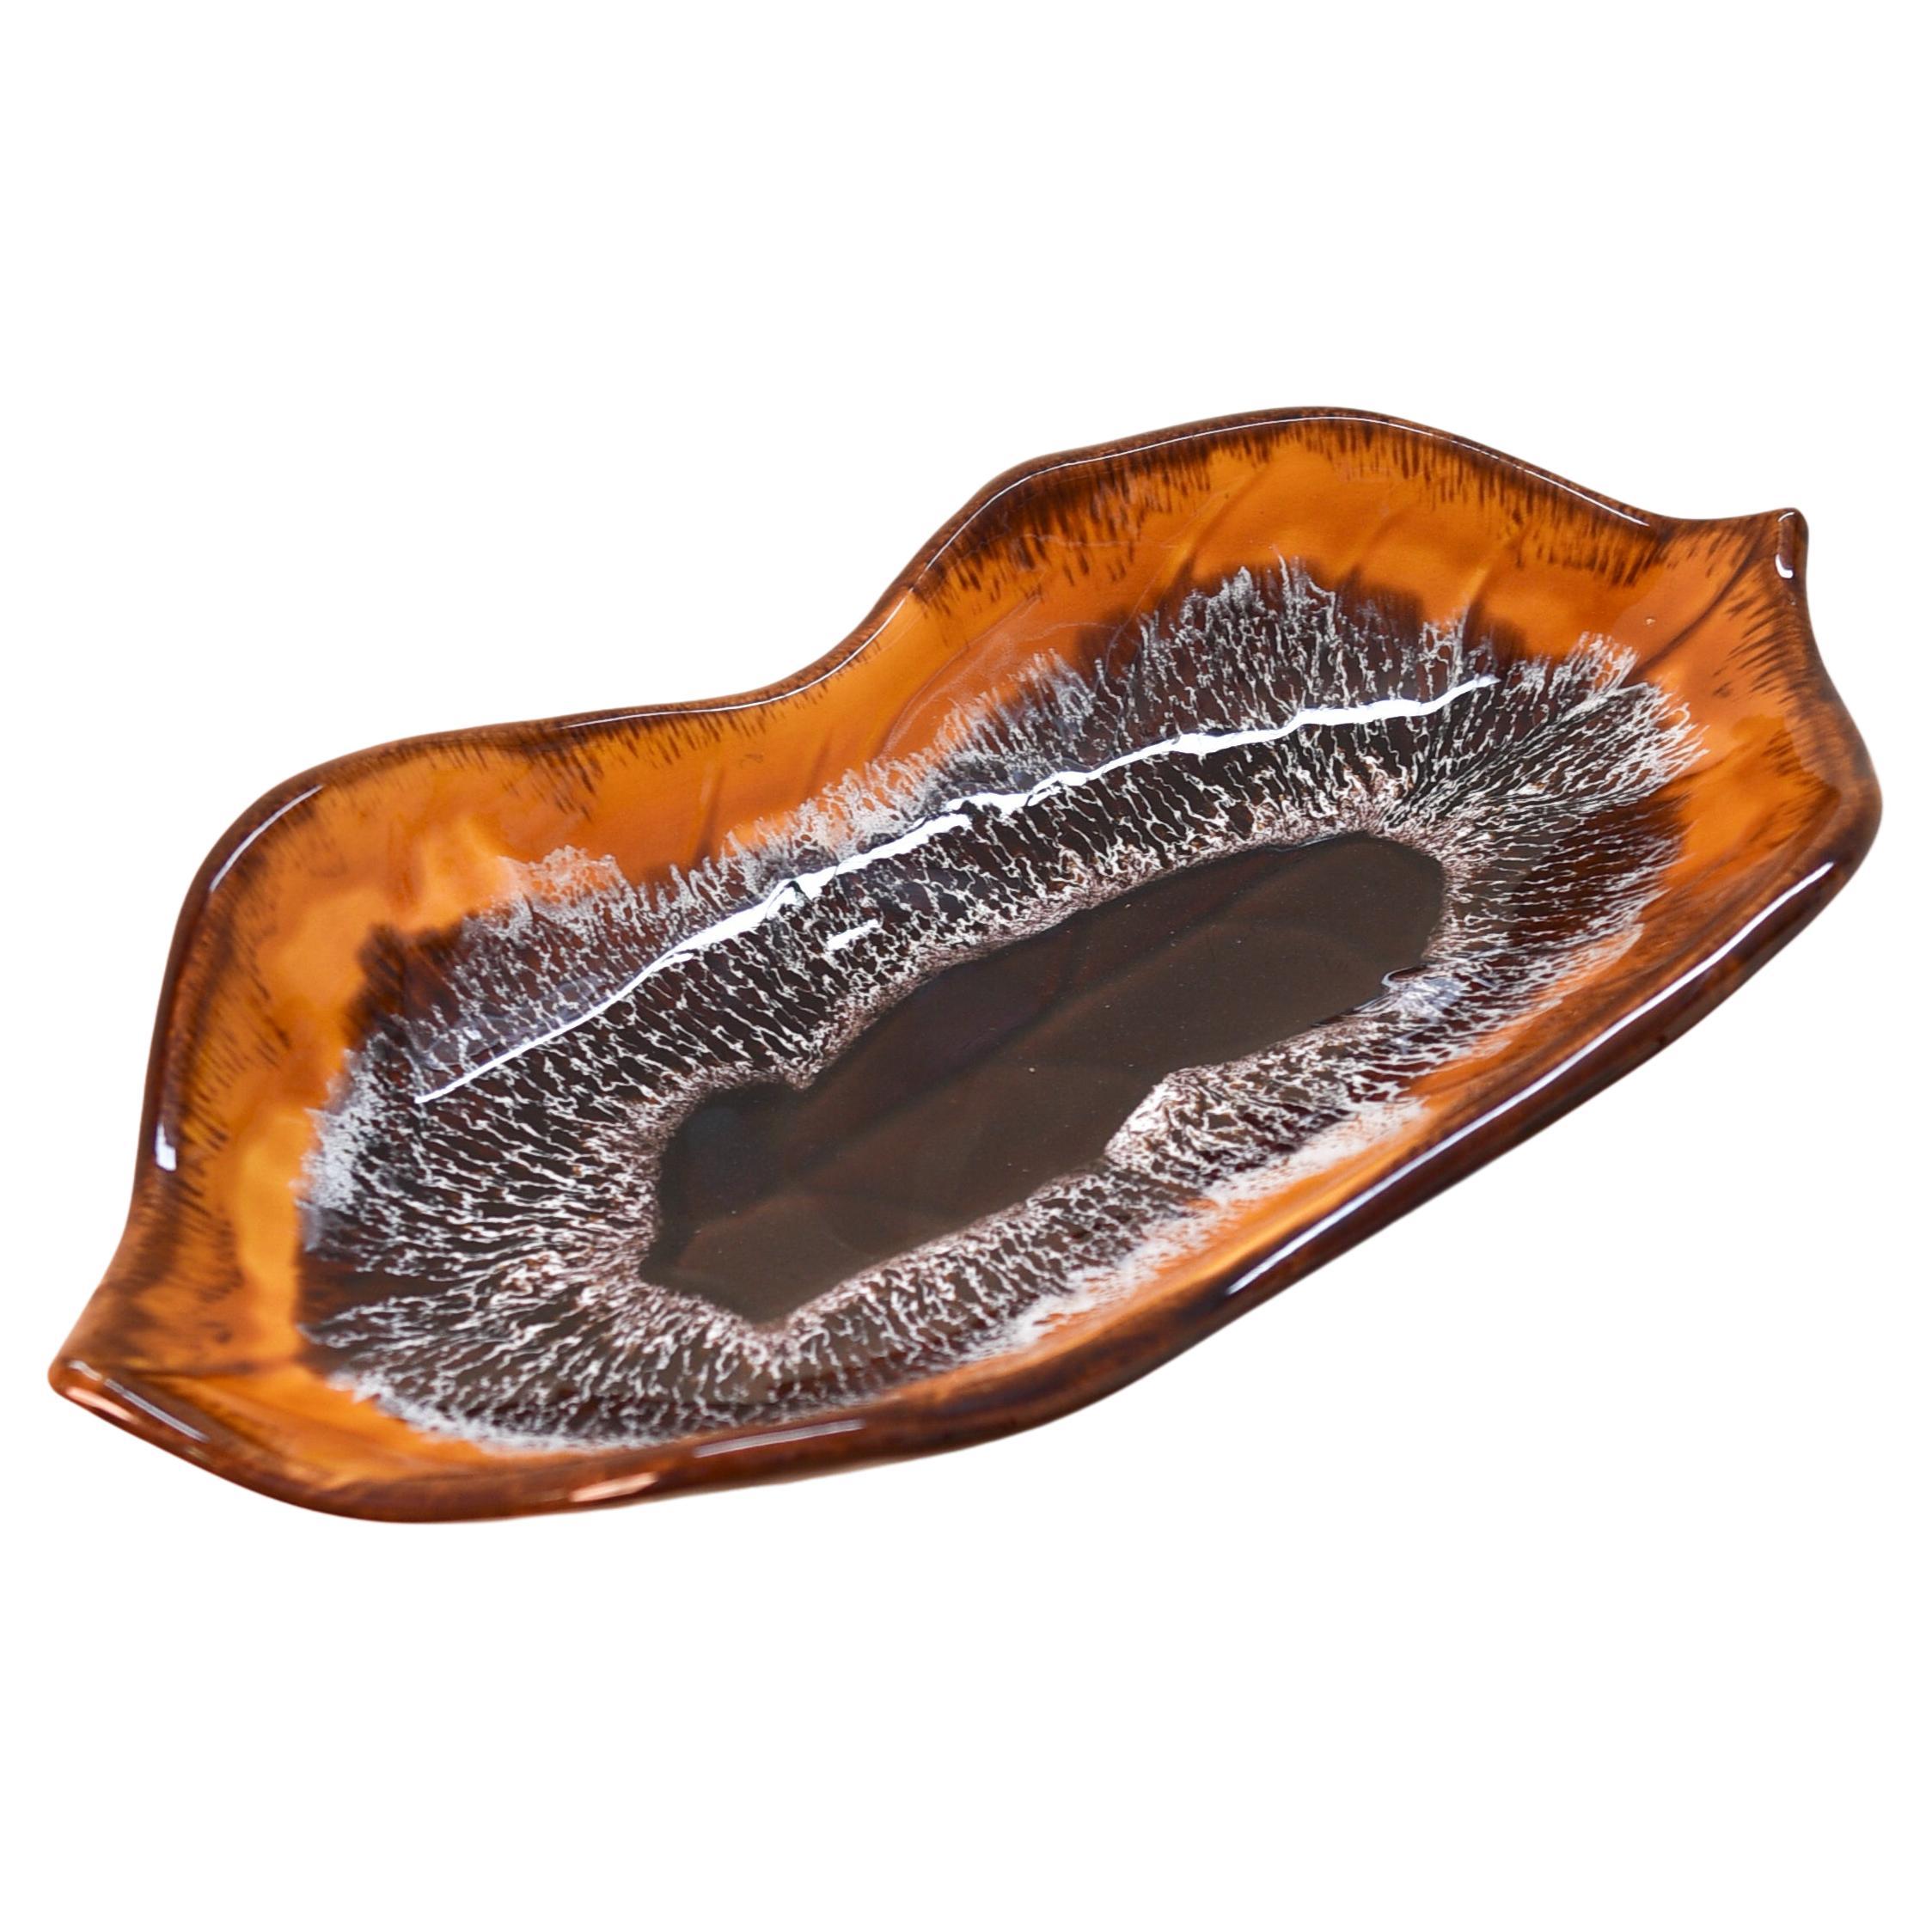 Ceramic tray in brown and orange, made by Vallauris (France)